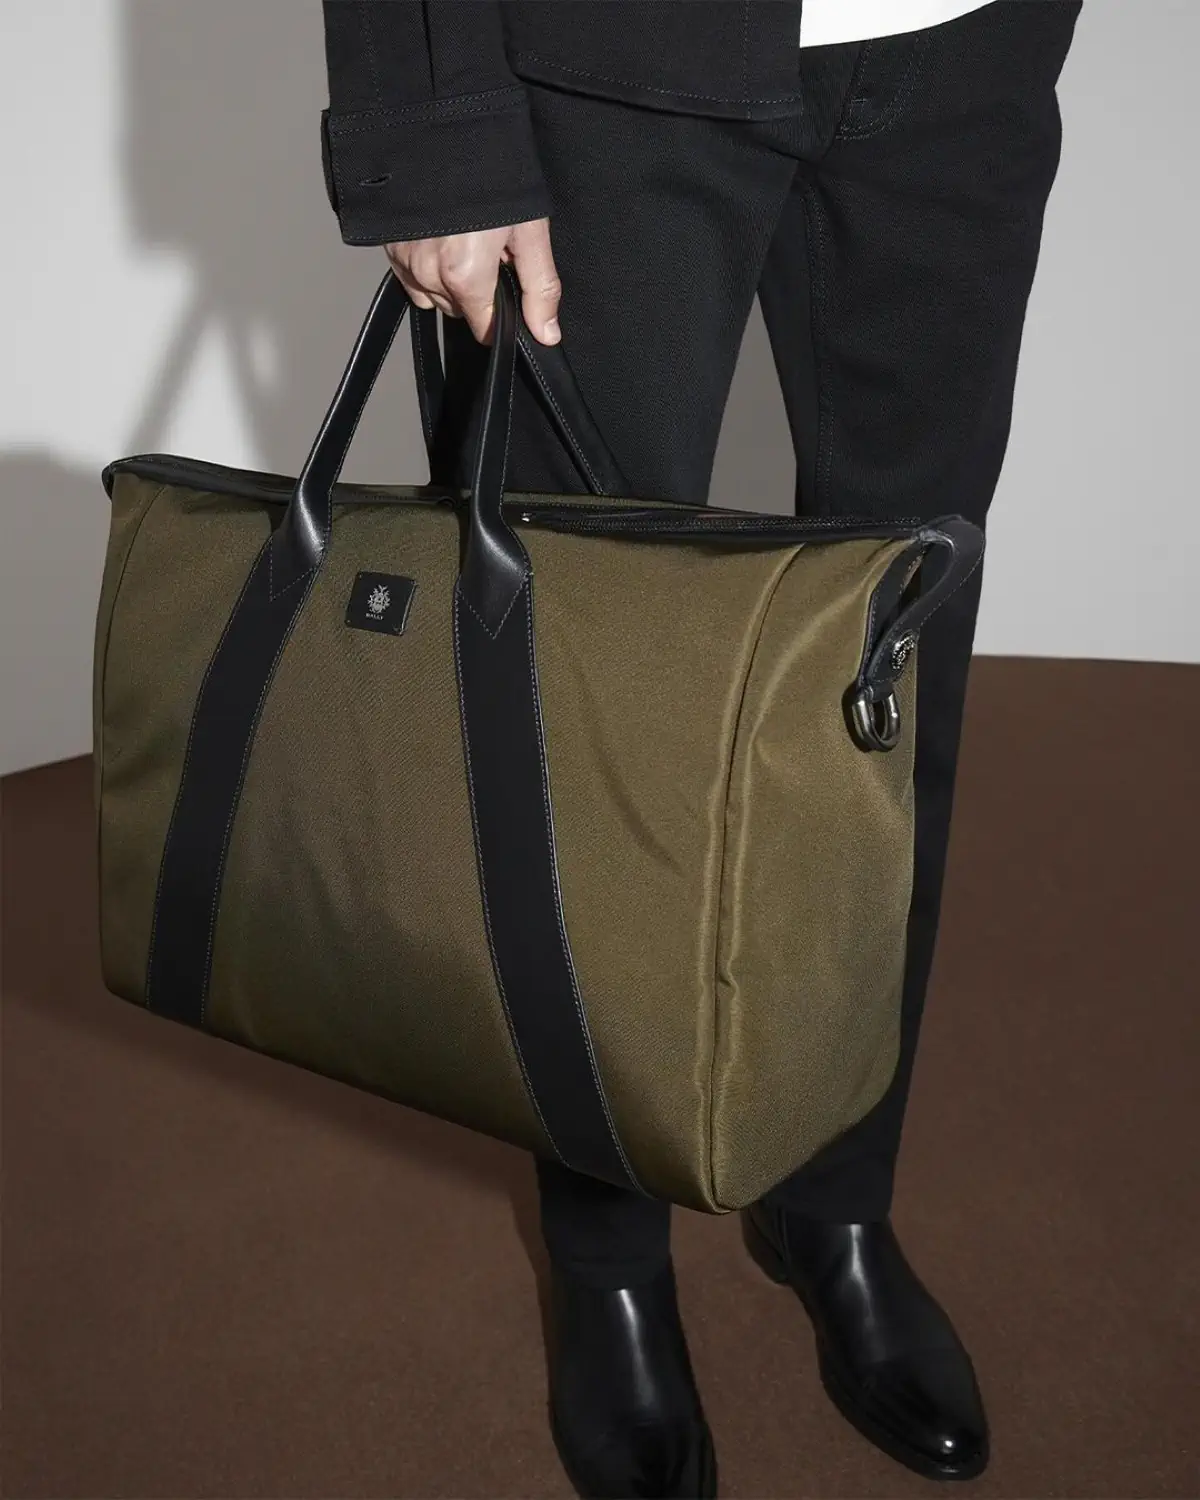 Bally unveils Adrien Brody's debut travel collection